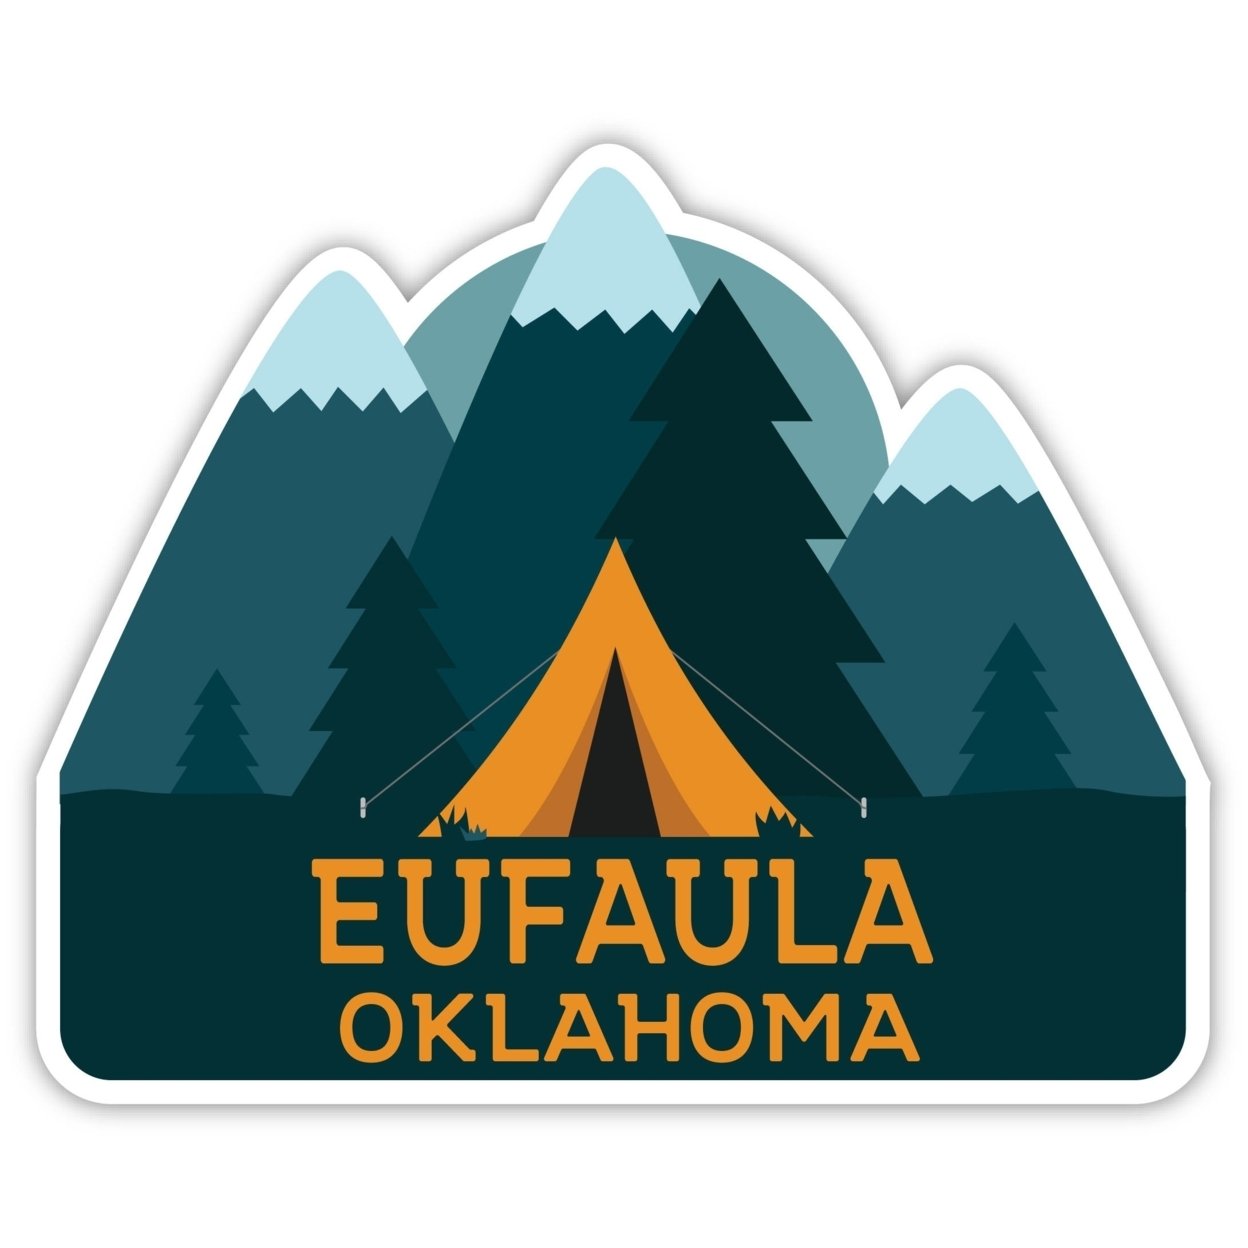 Eufaula Oklahoma Souvenir Decorative Stickers (Choose Theme And Size) - 4-Pack, 4-Inch, Tent